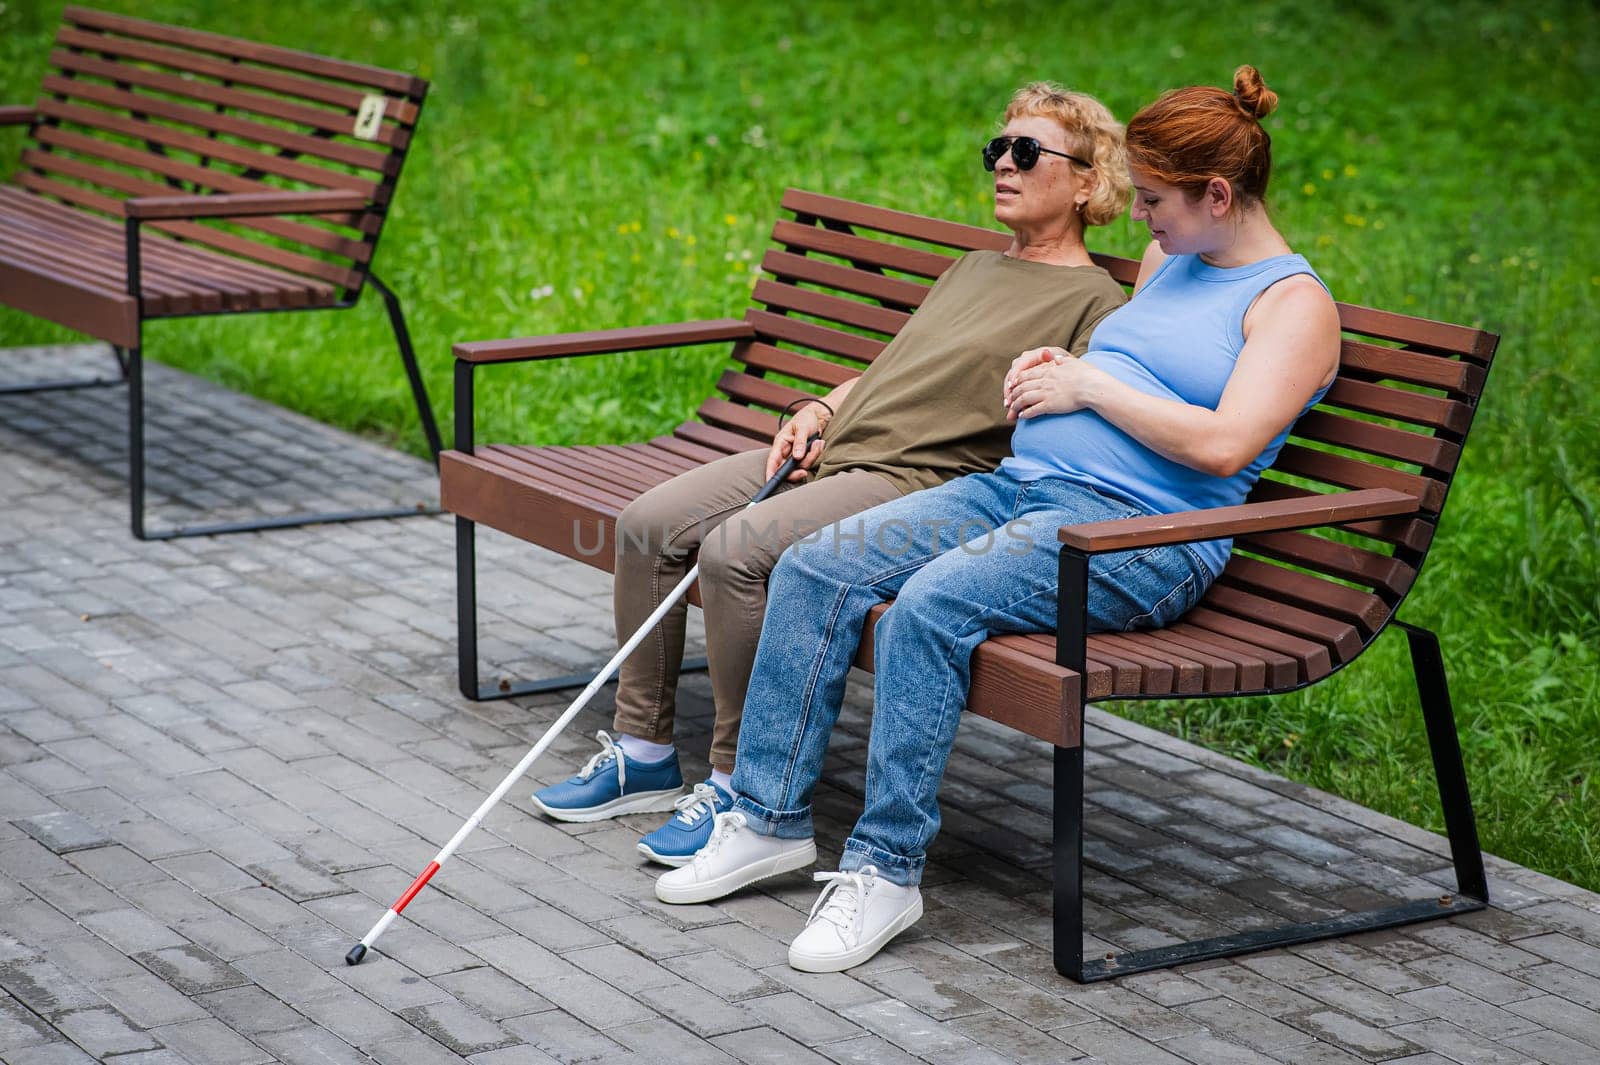 An elderly blind woman and her pregnant daughter are sitting on a bench in the park. by mrwed54